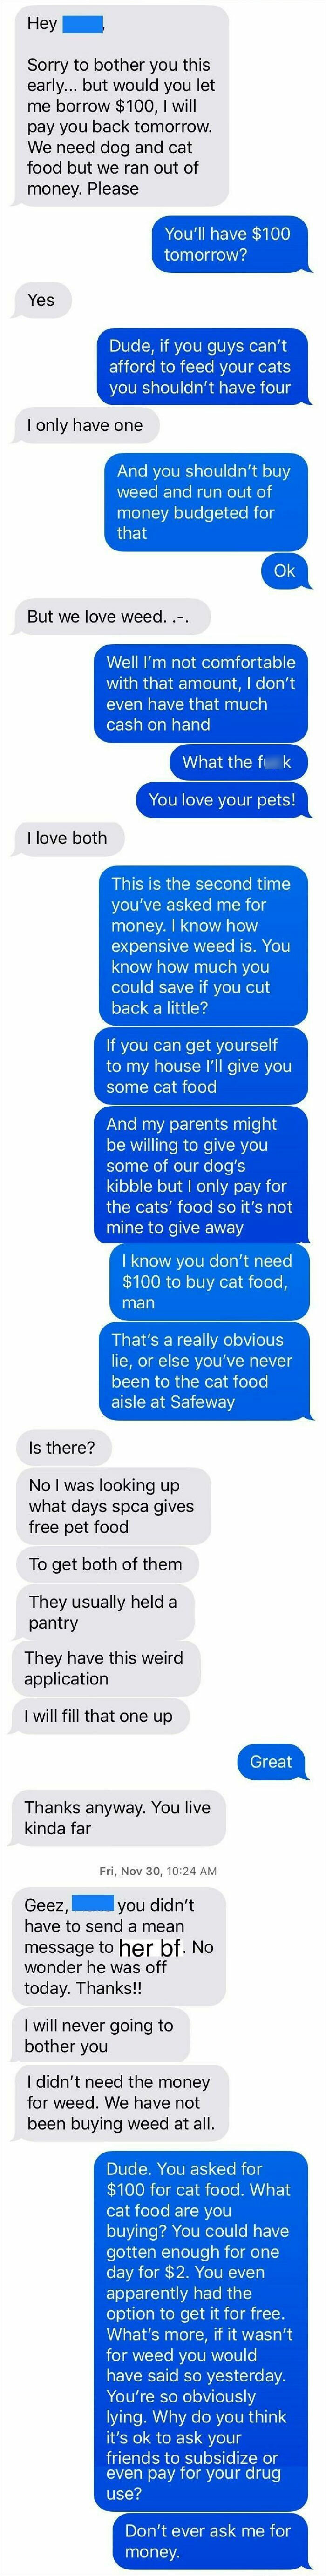 My Old Roommate Wanted Money To Buy Cat Food, But Not Actual Cat Food